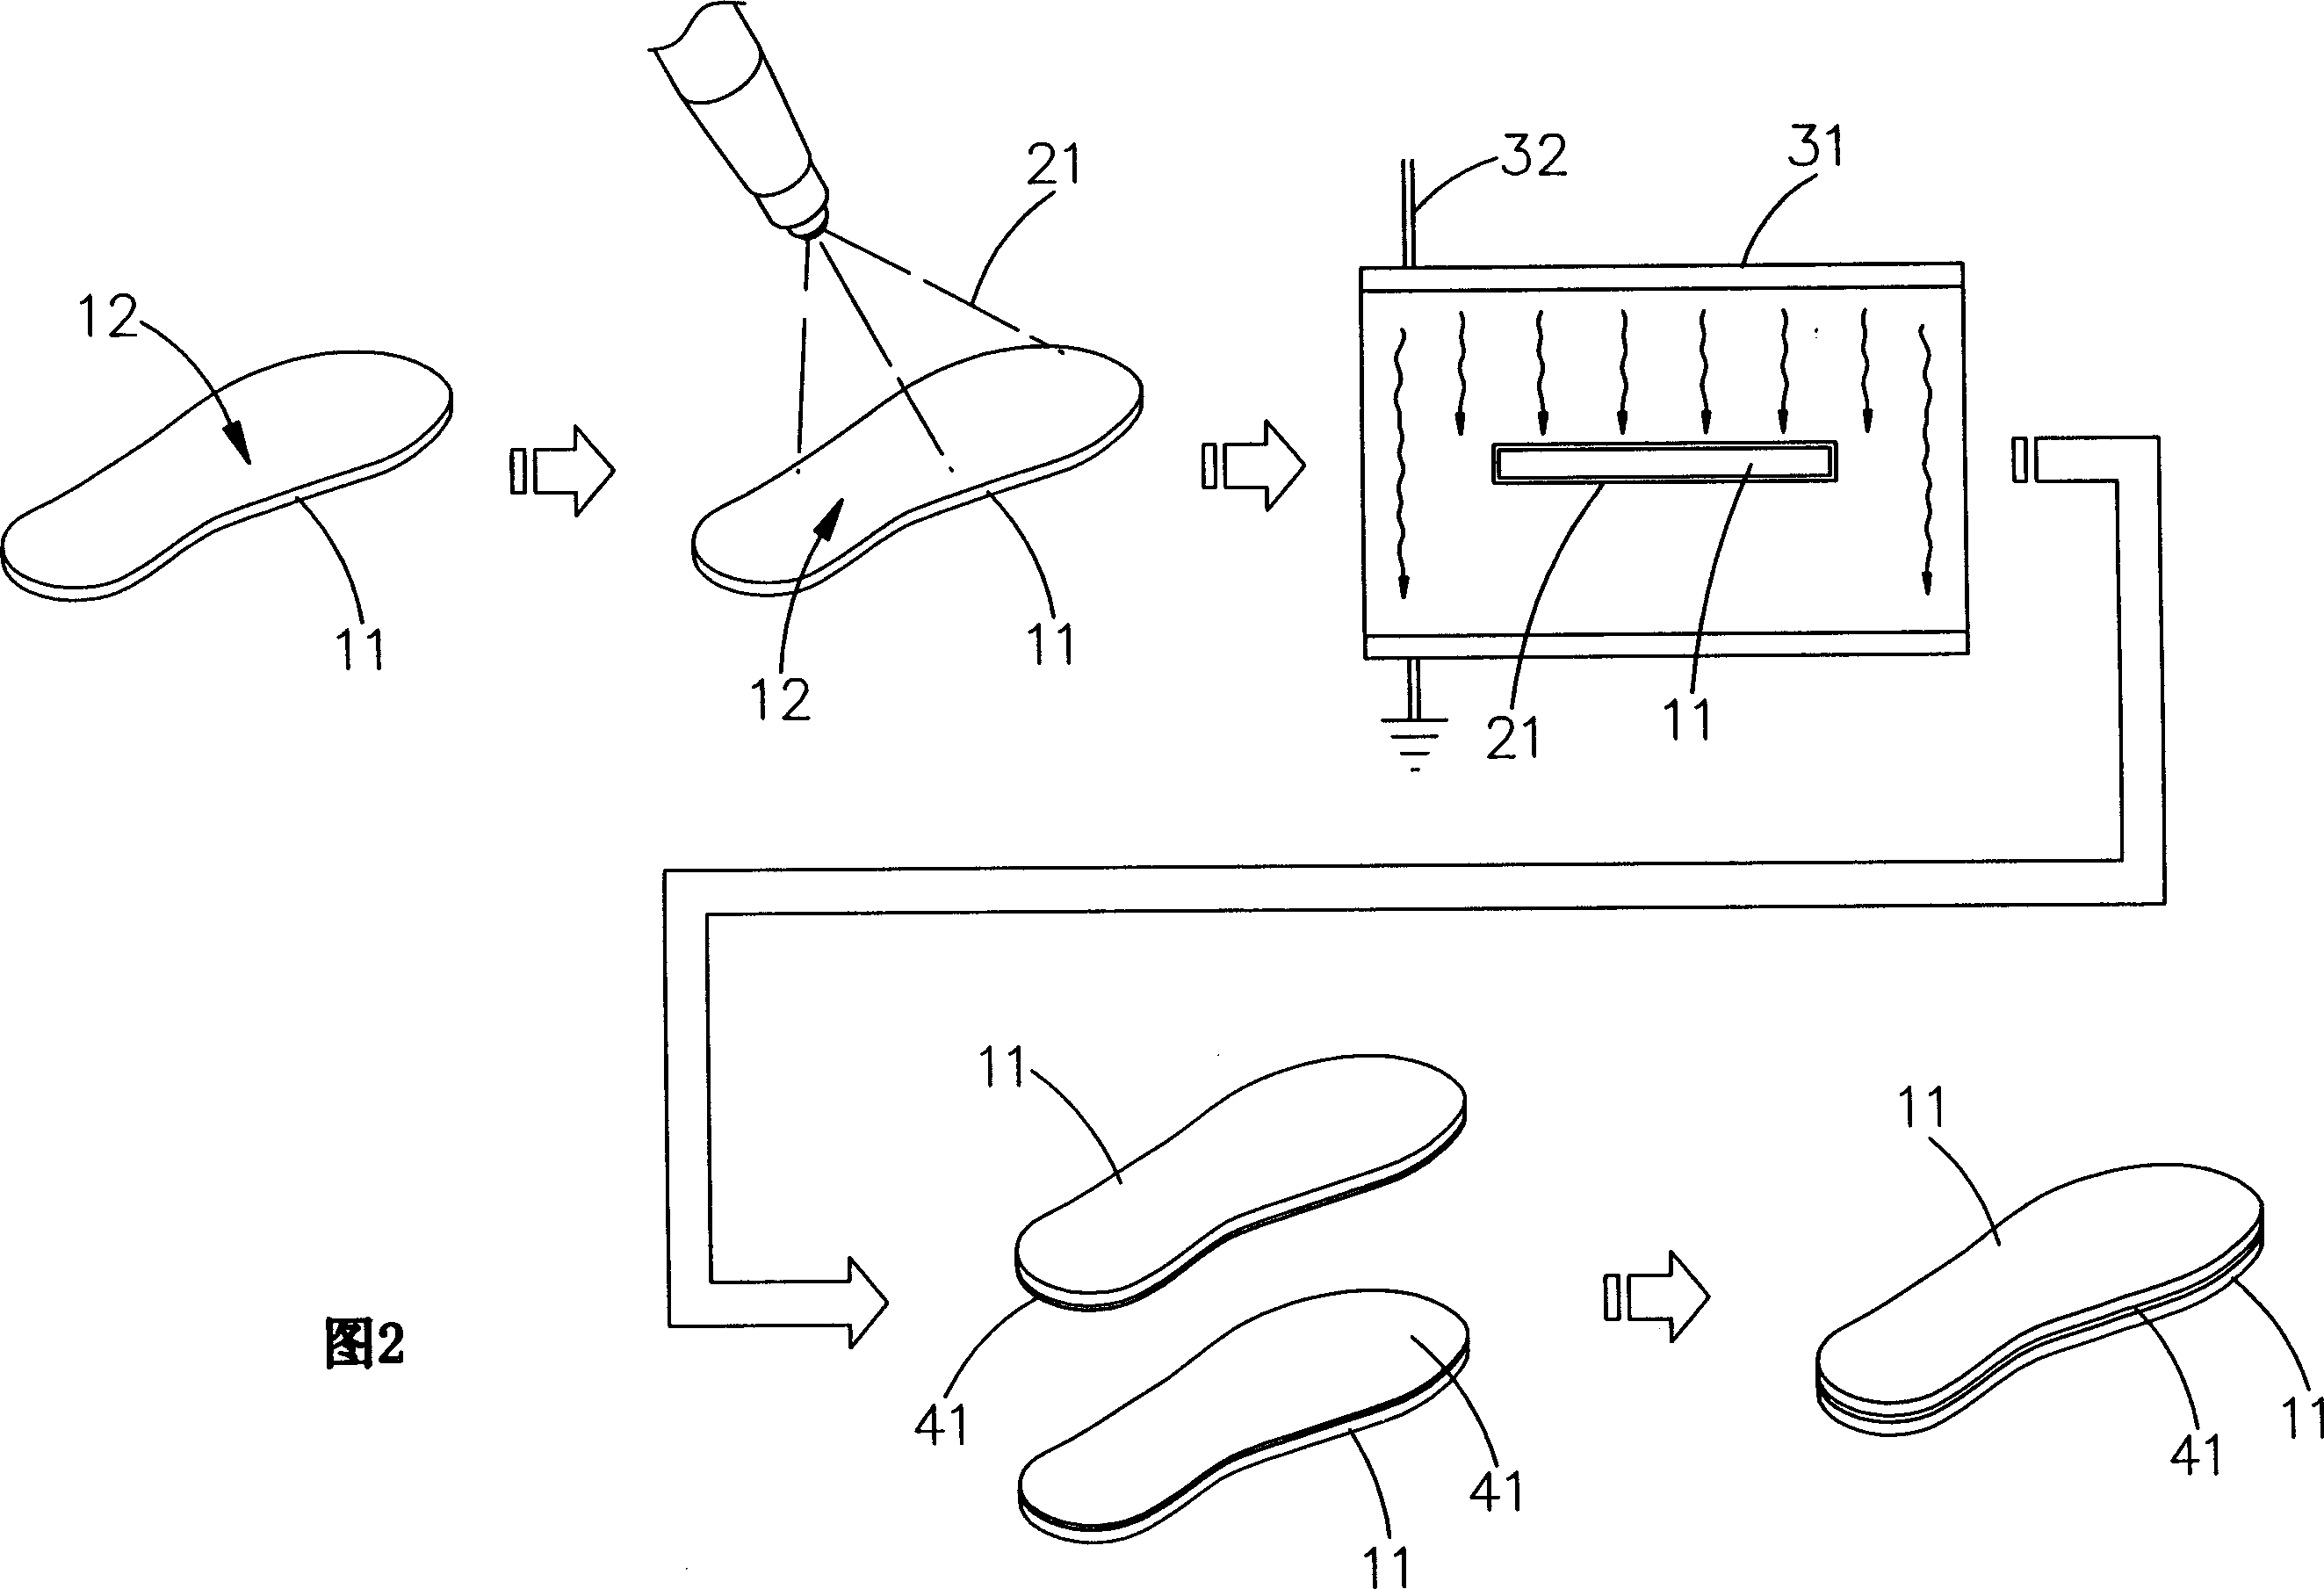 Electric plasm glue processing method for shoes material